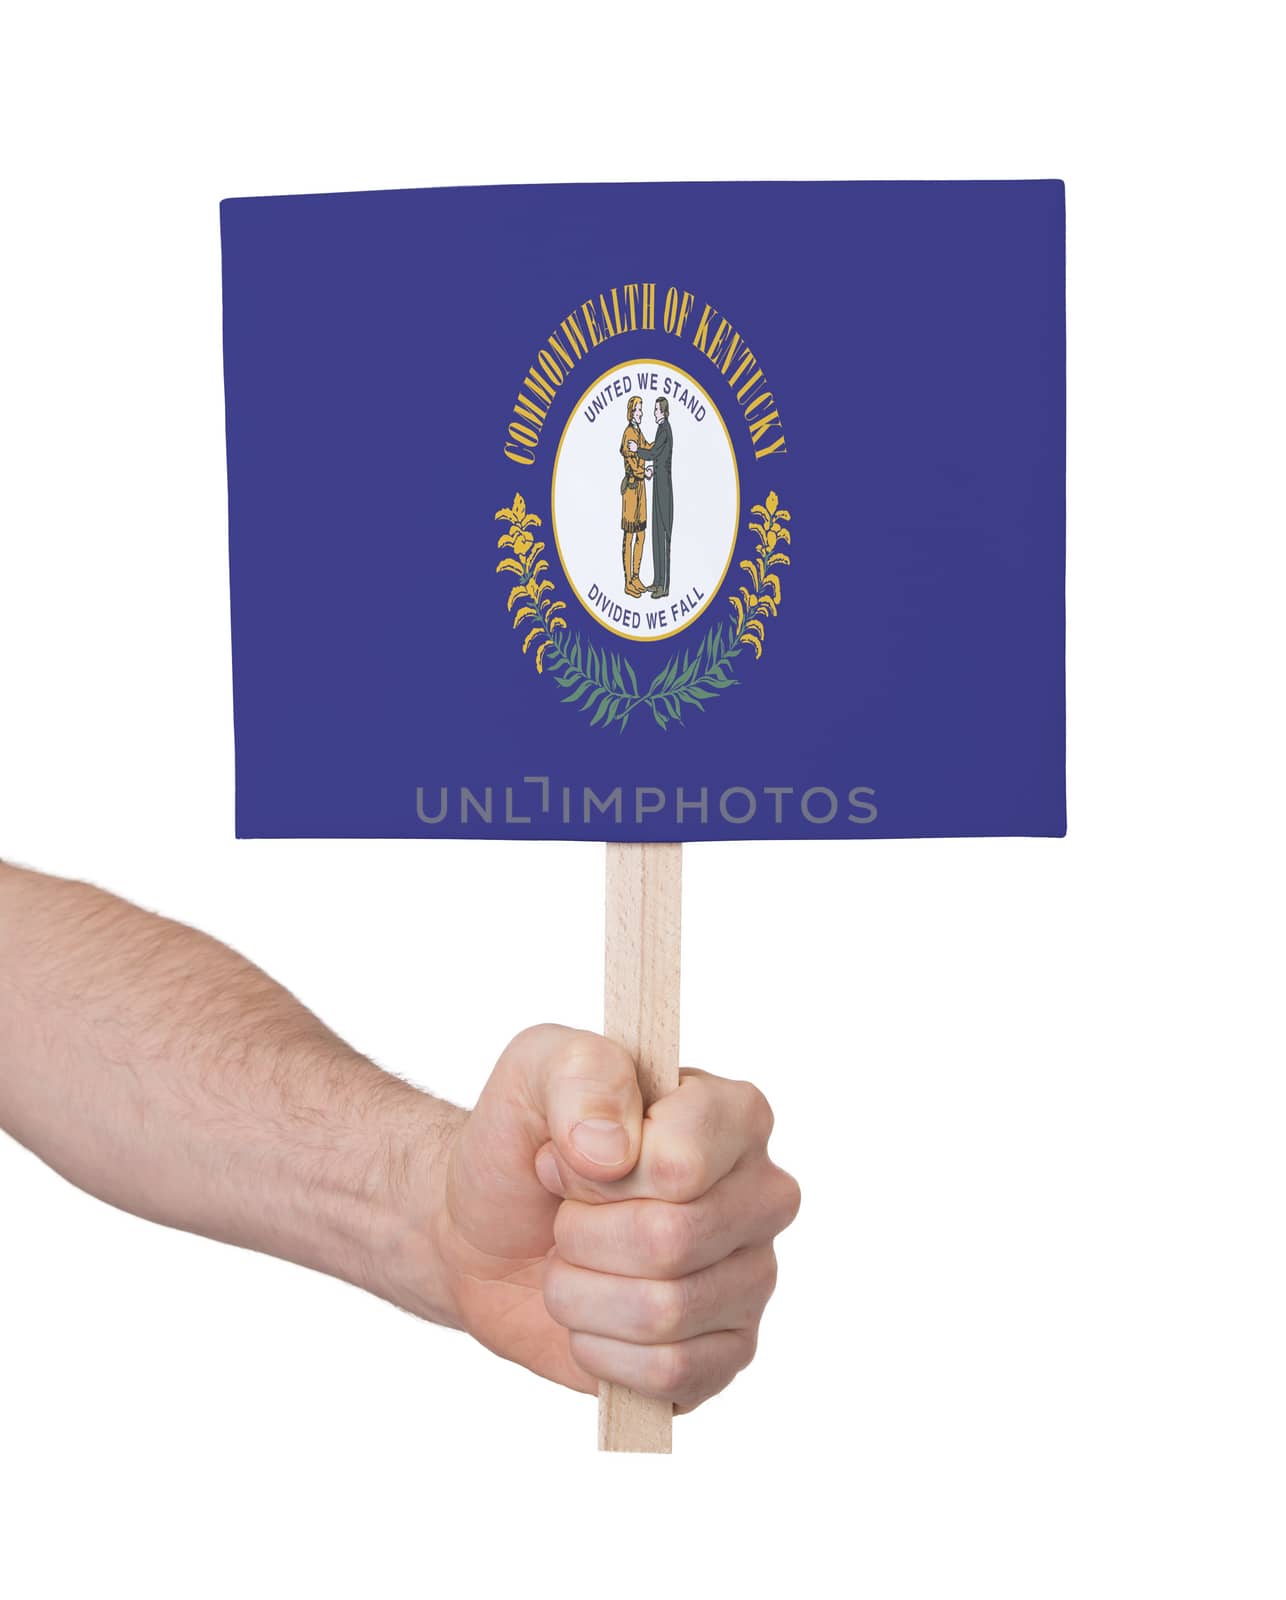 Hand holding small card, isolated on white - Flag of Kentucky